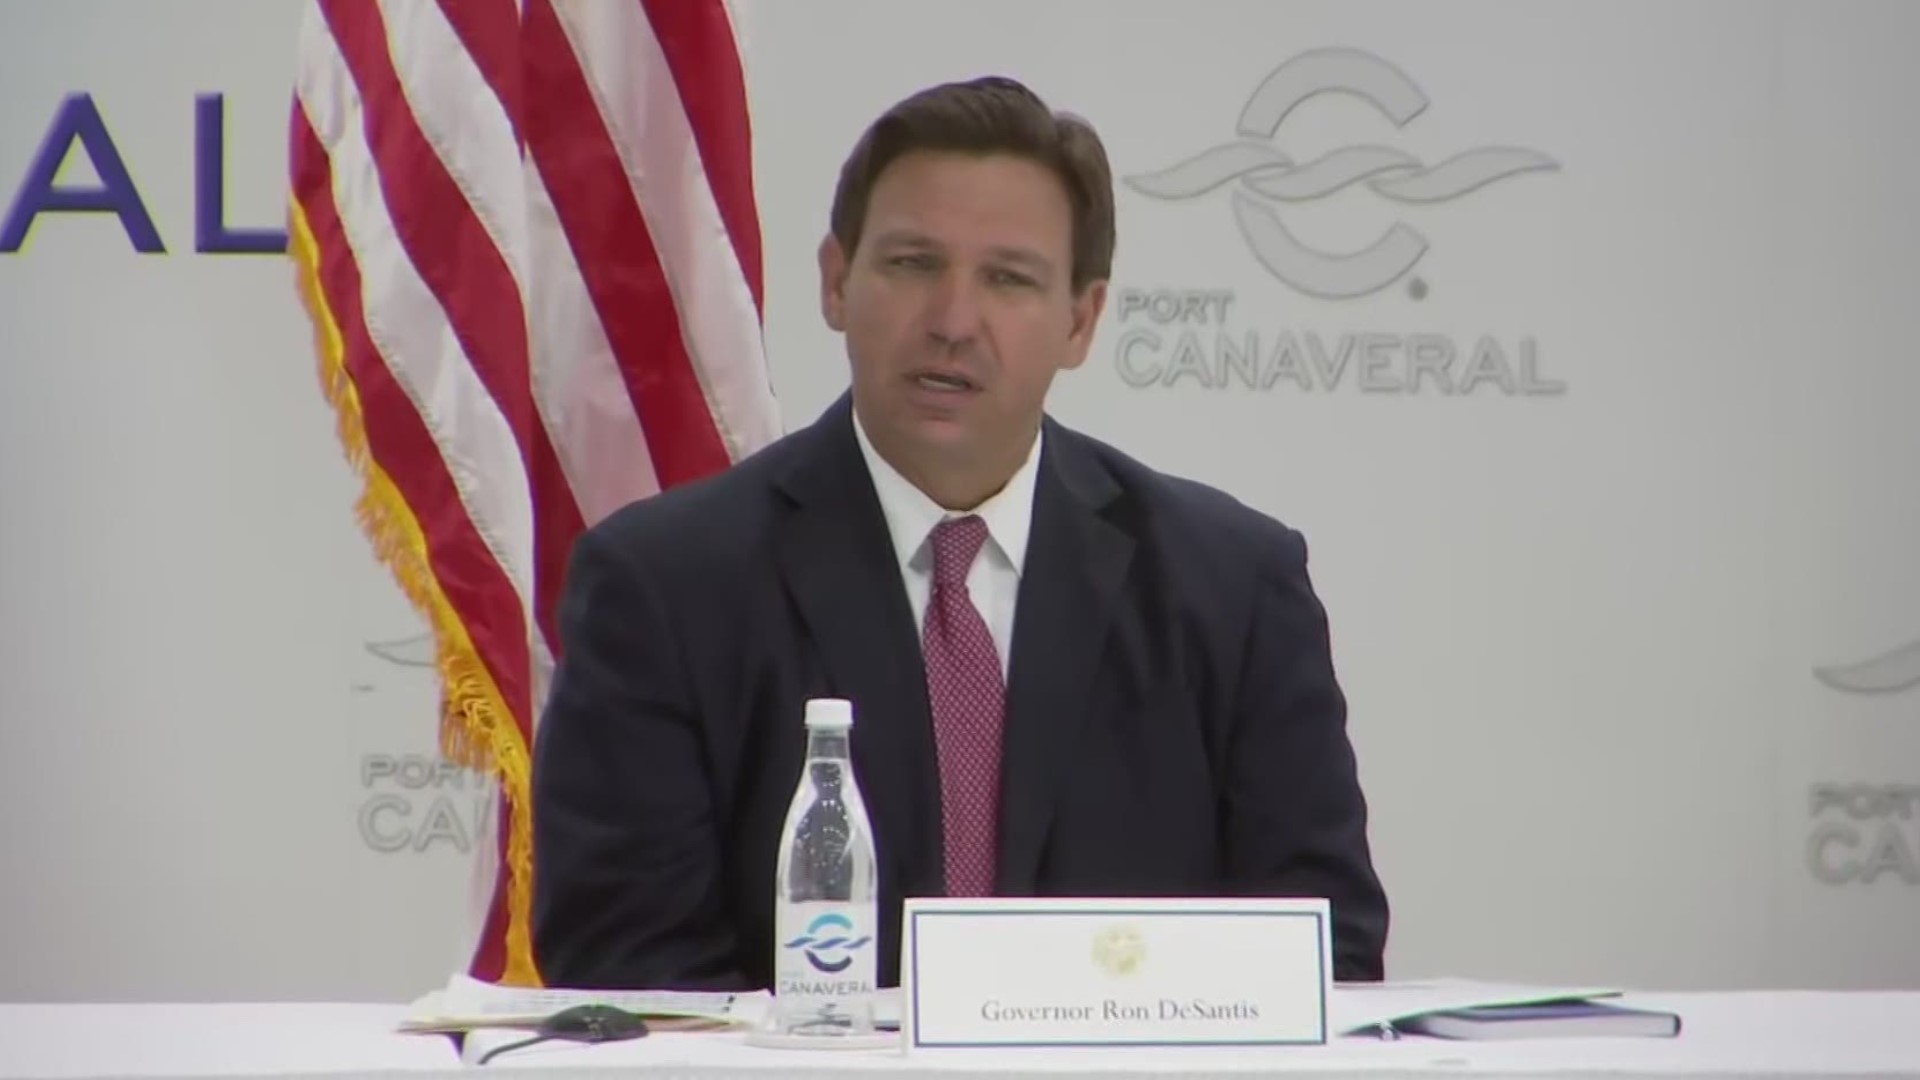 Gov. DeSantis met with cruise line leaders to talk about the CDC's no-sail order.